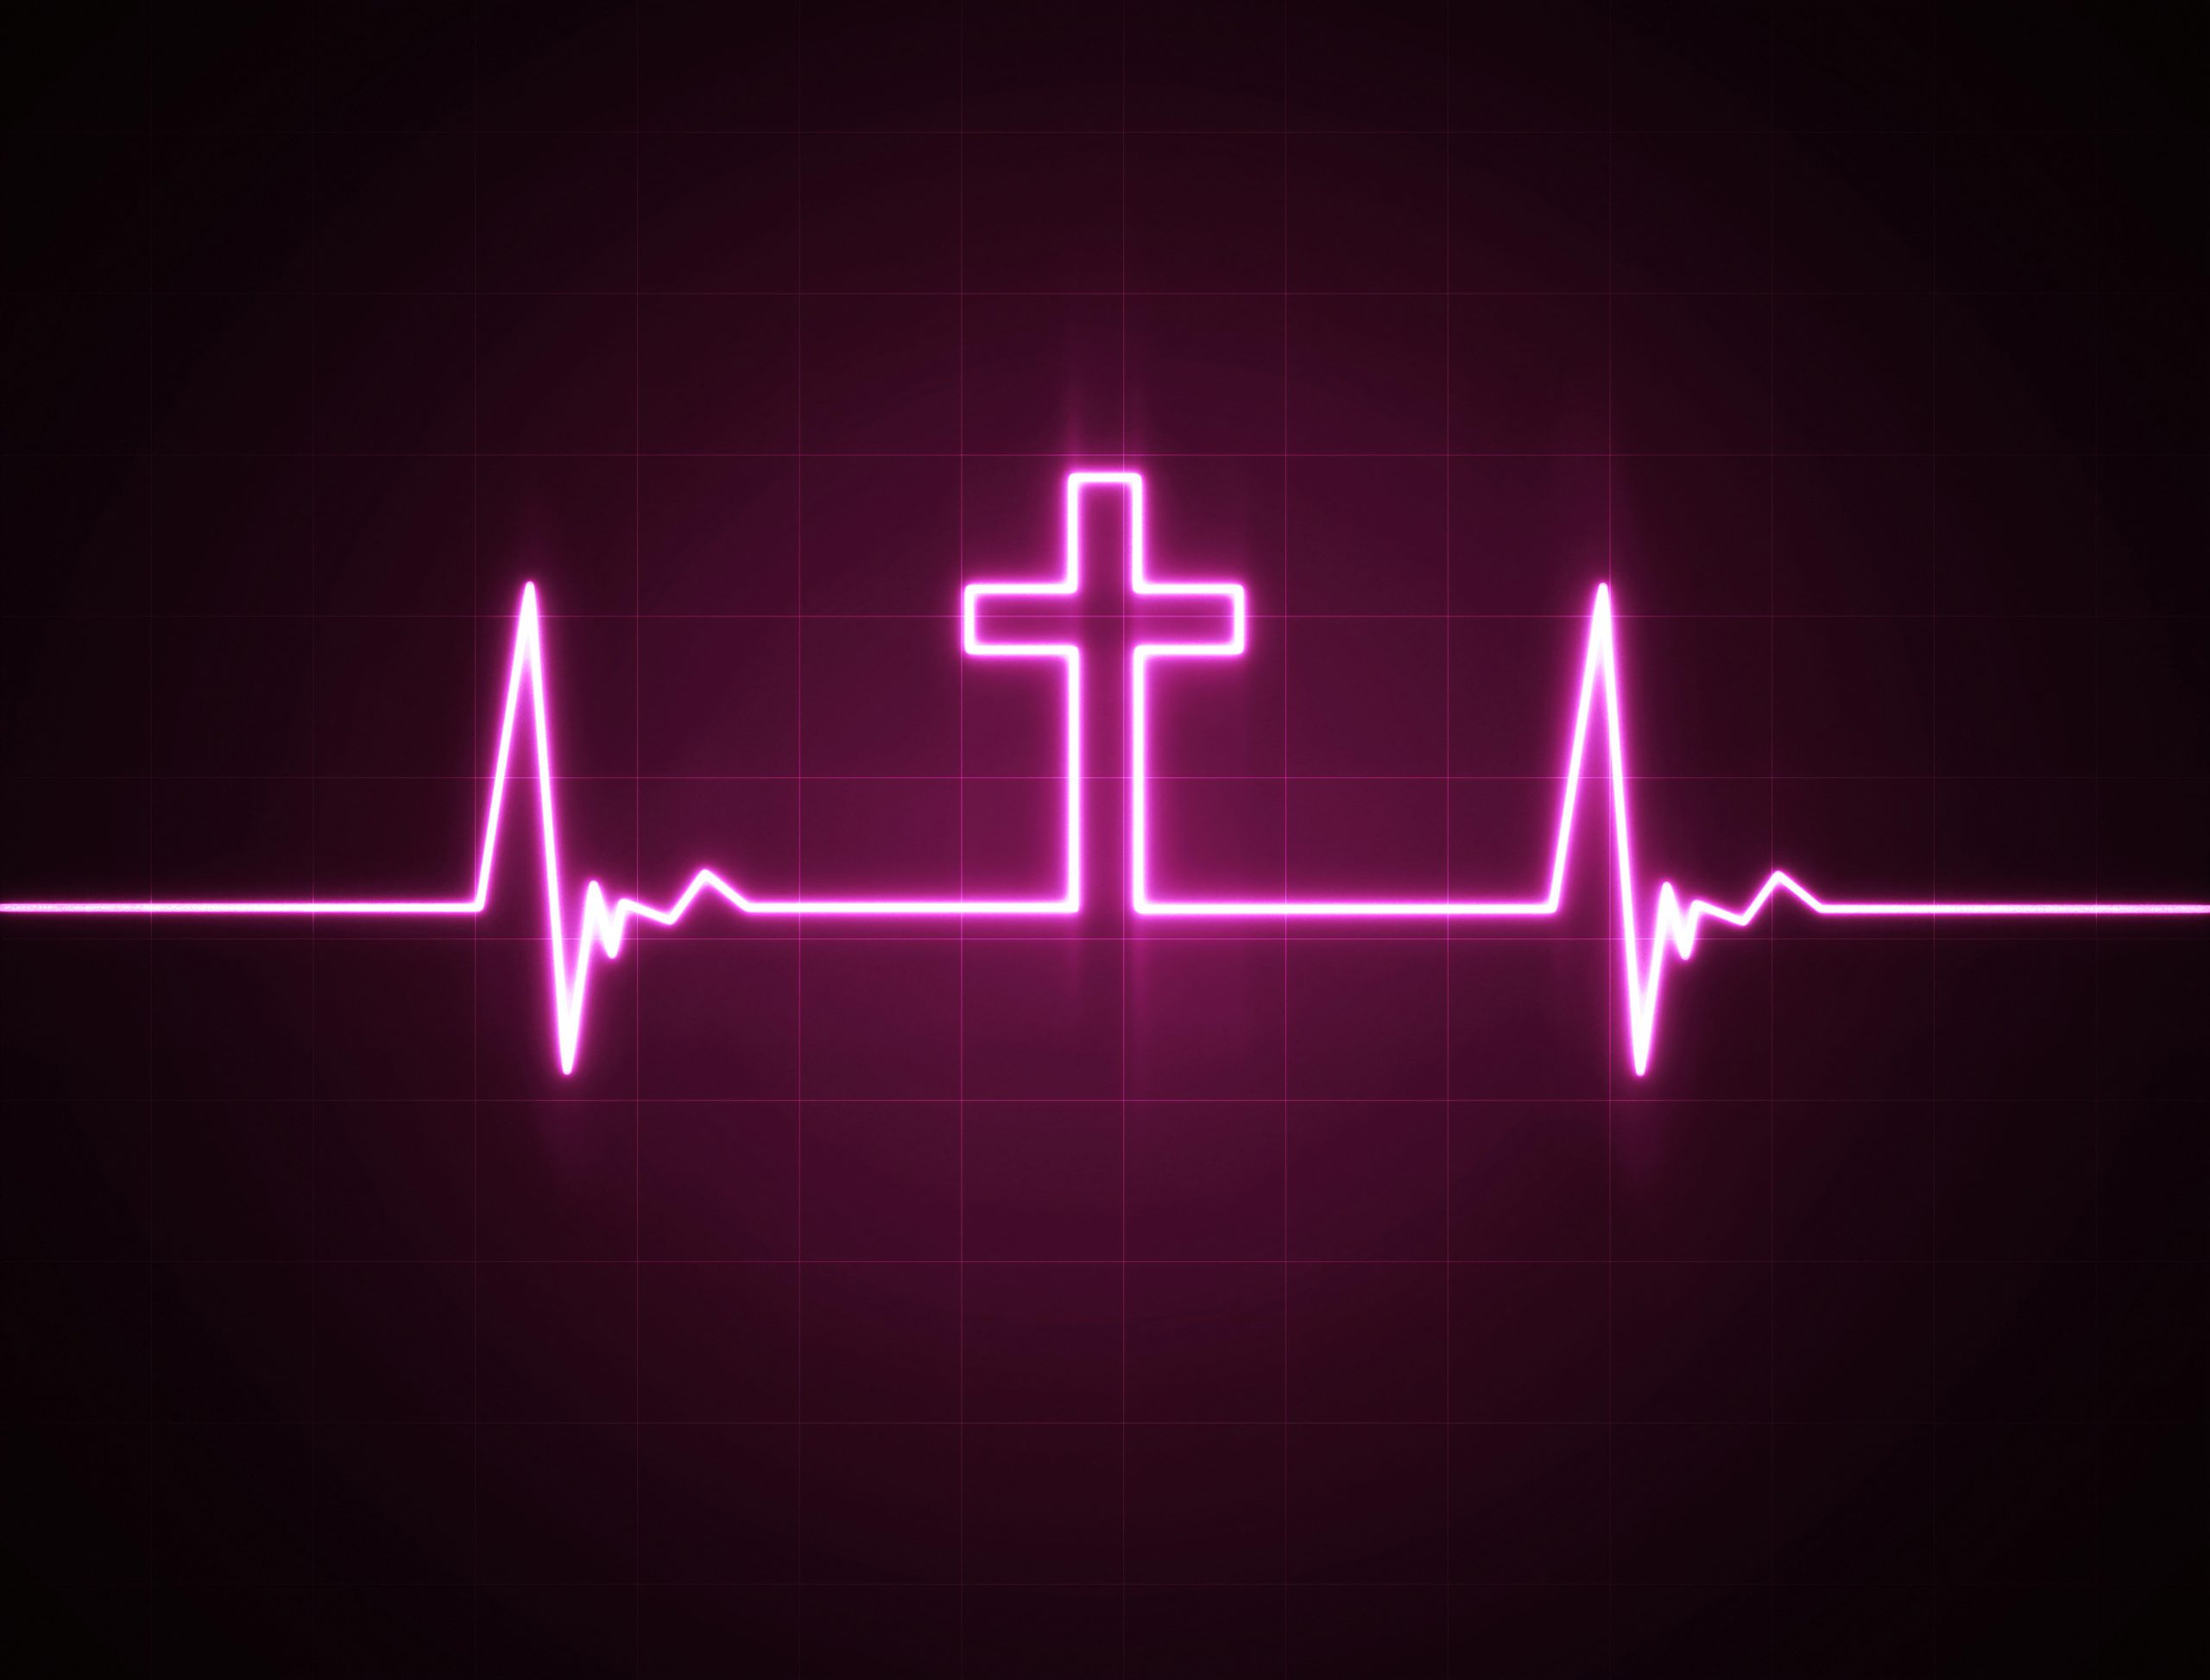 A heart rate monitor with a Christian cross symbol.